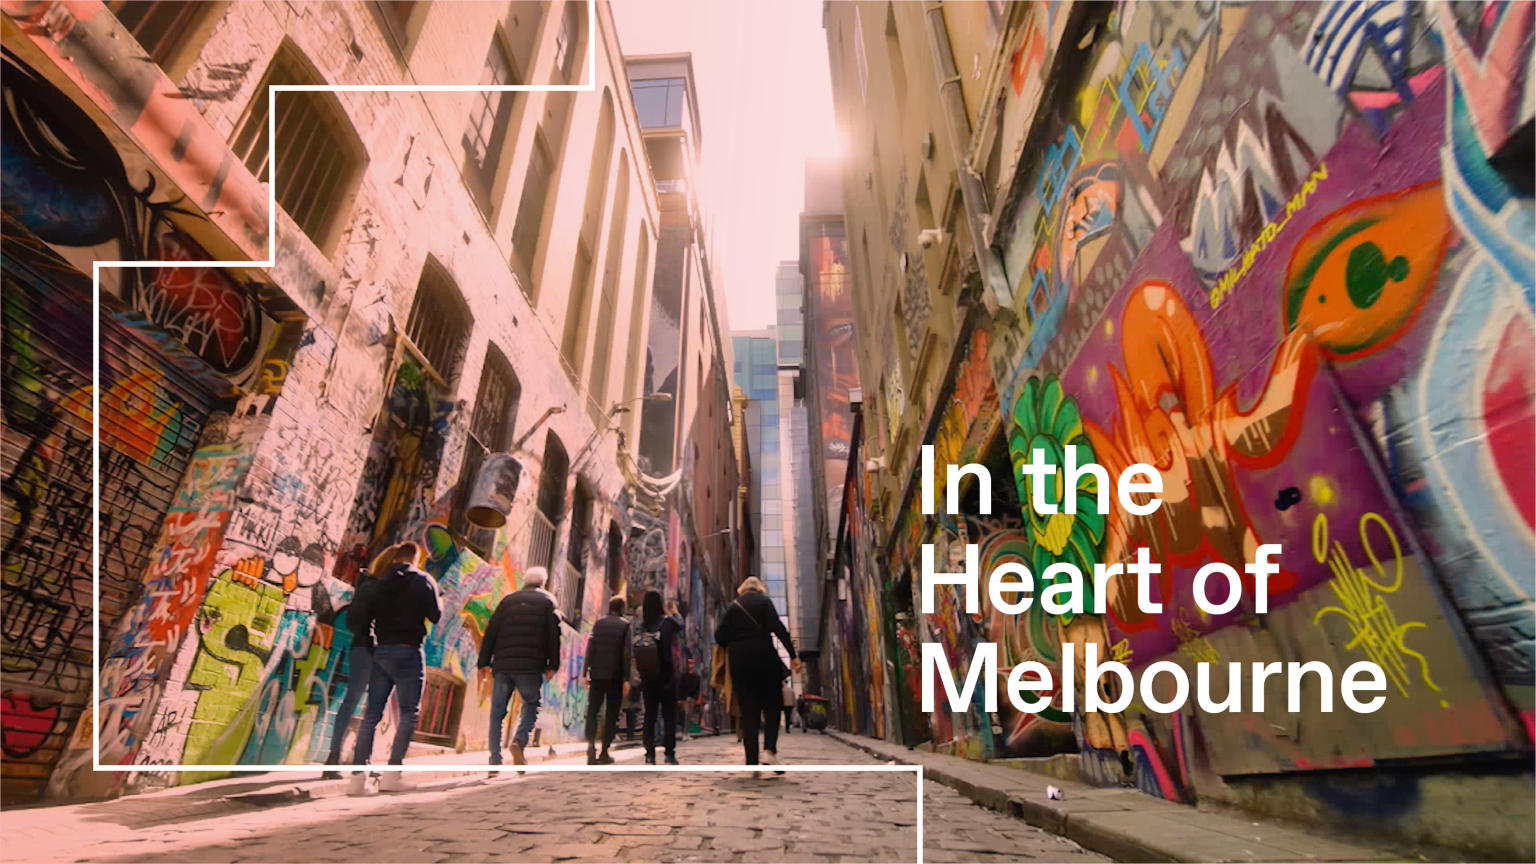 Immerse yourself in the heart of Melbourne for an authentic experience of the city.